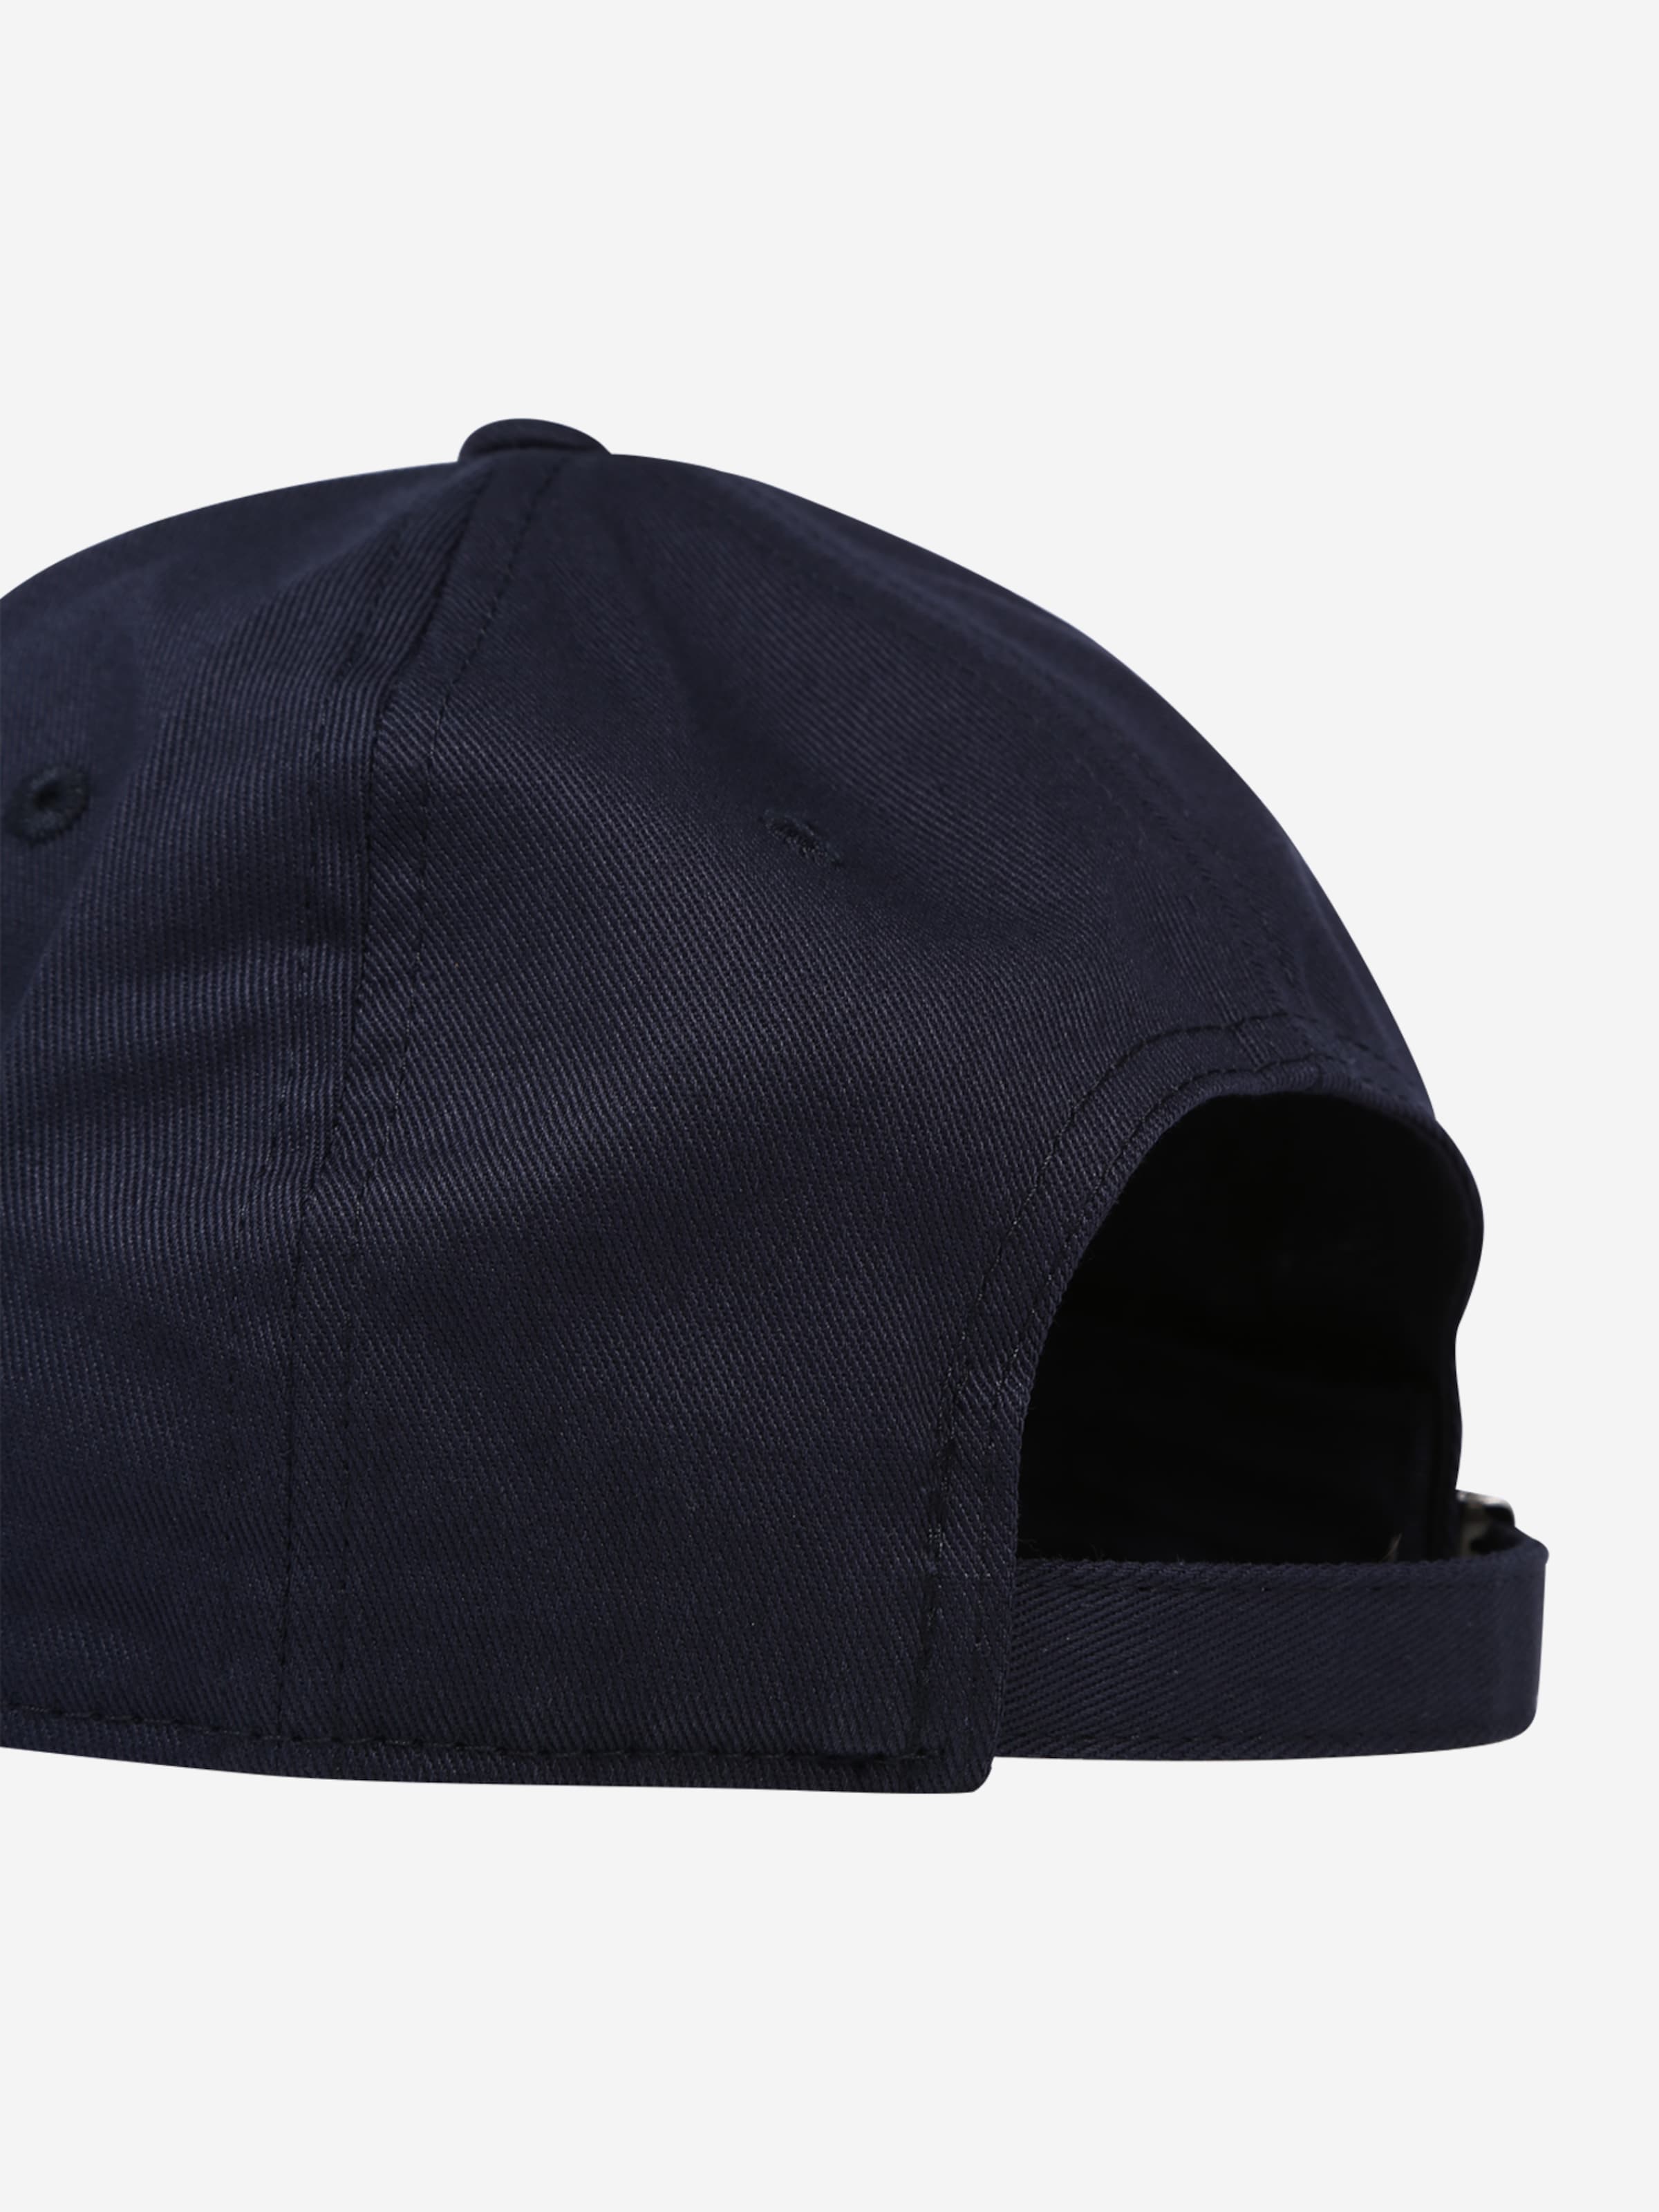 JOOP! Jeans Cap 'Markos' in Navy | ABOUT YOU